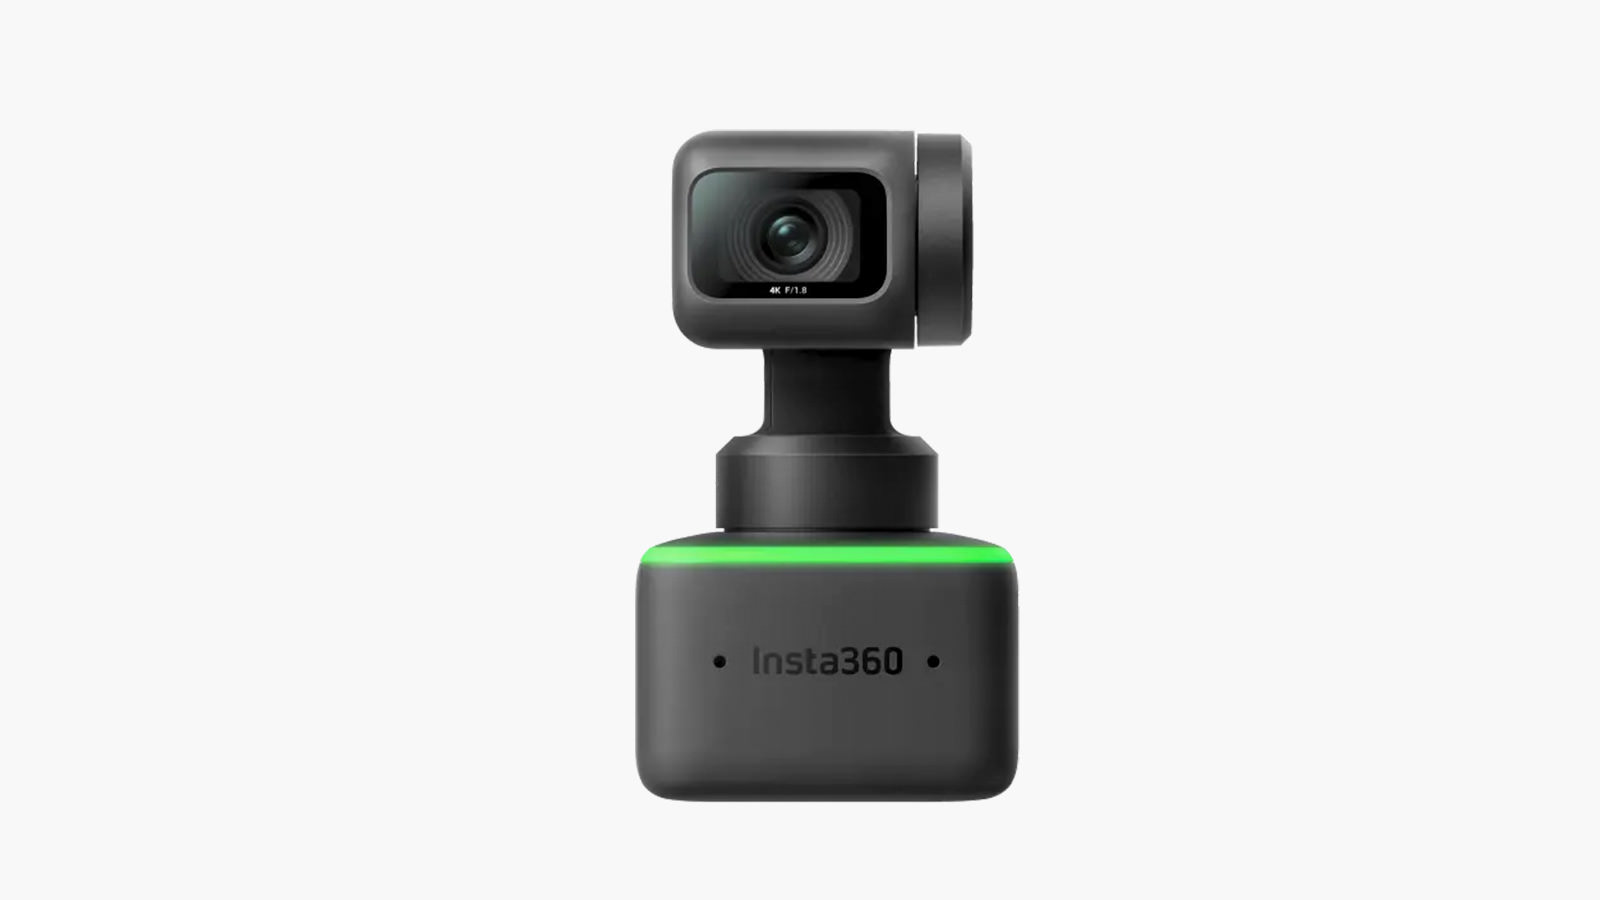 The Insta360 Link Is Average IMBOLDN Not - Webcam Your